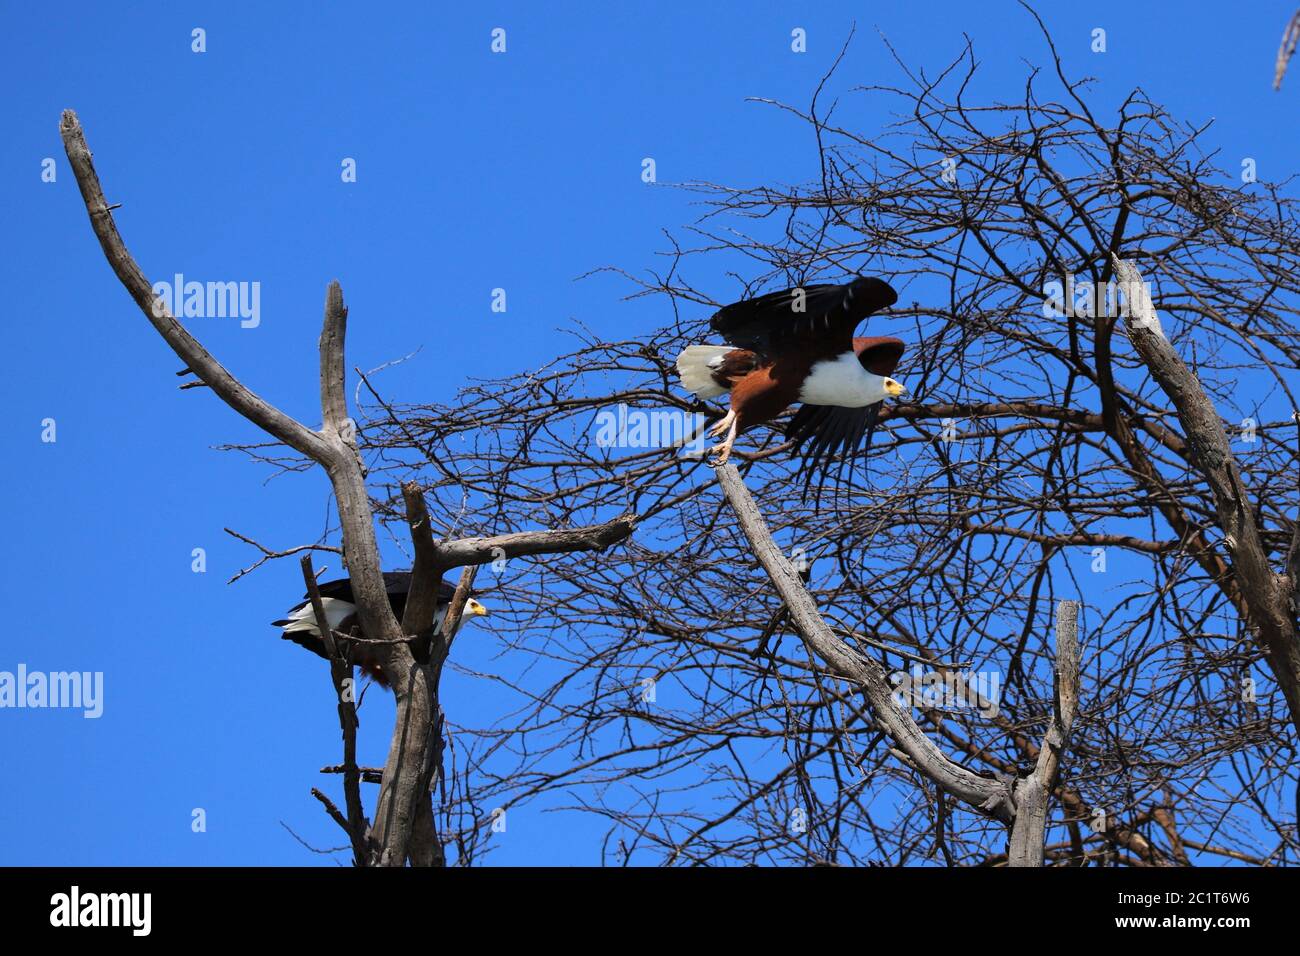 Take-off of one of the both african fish eagles from the tree Stock Photo